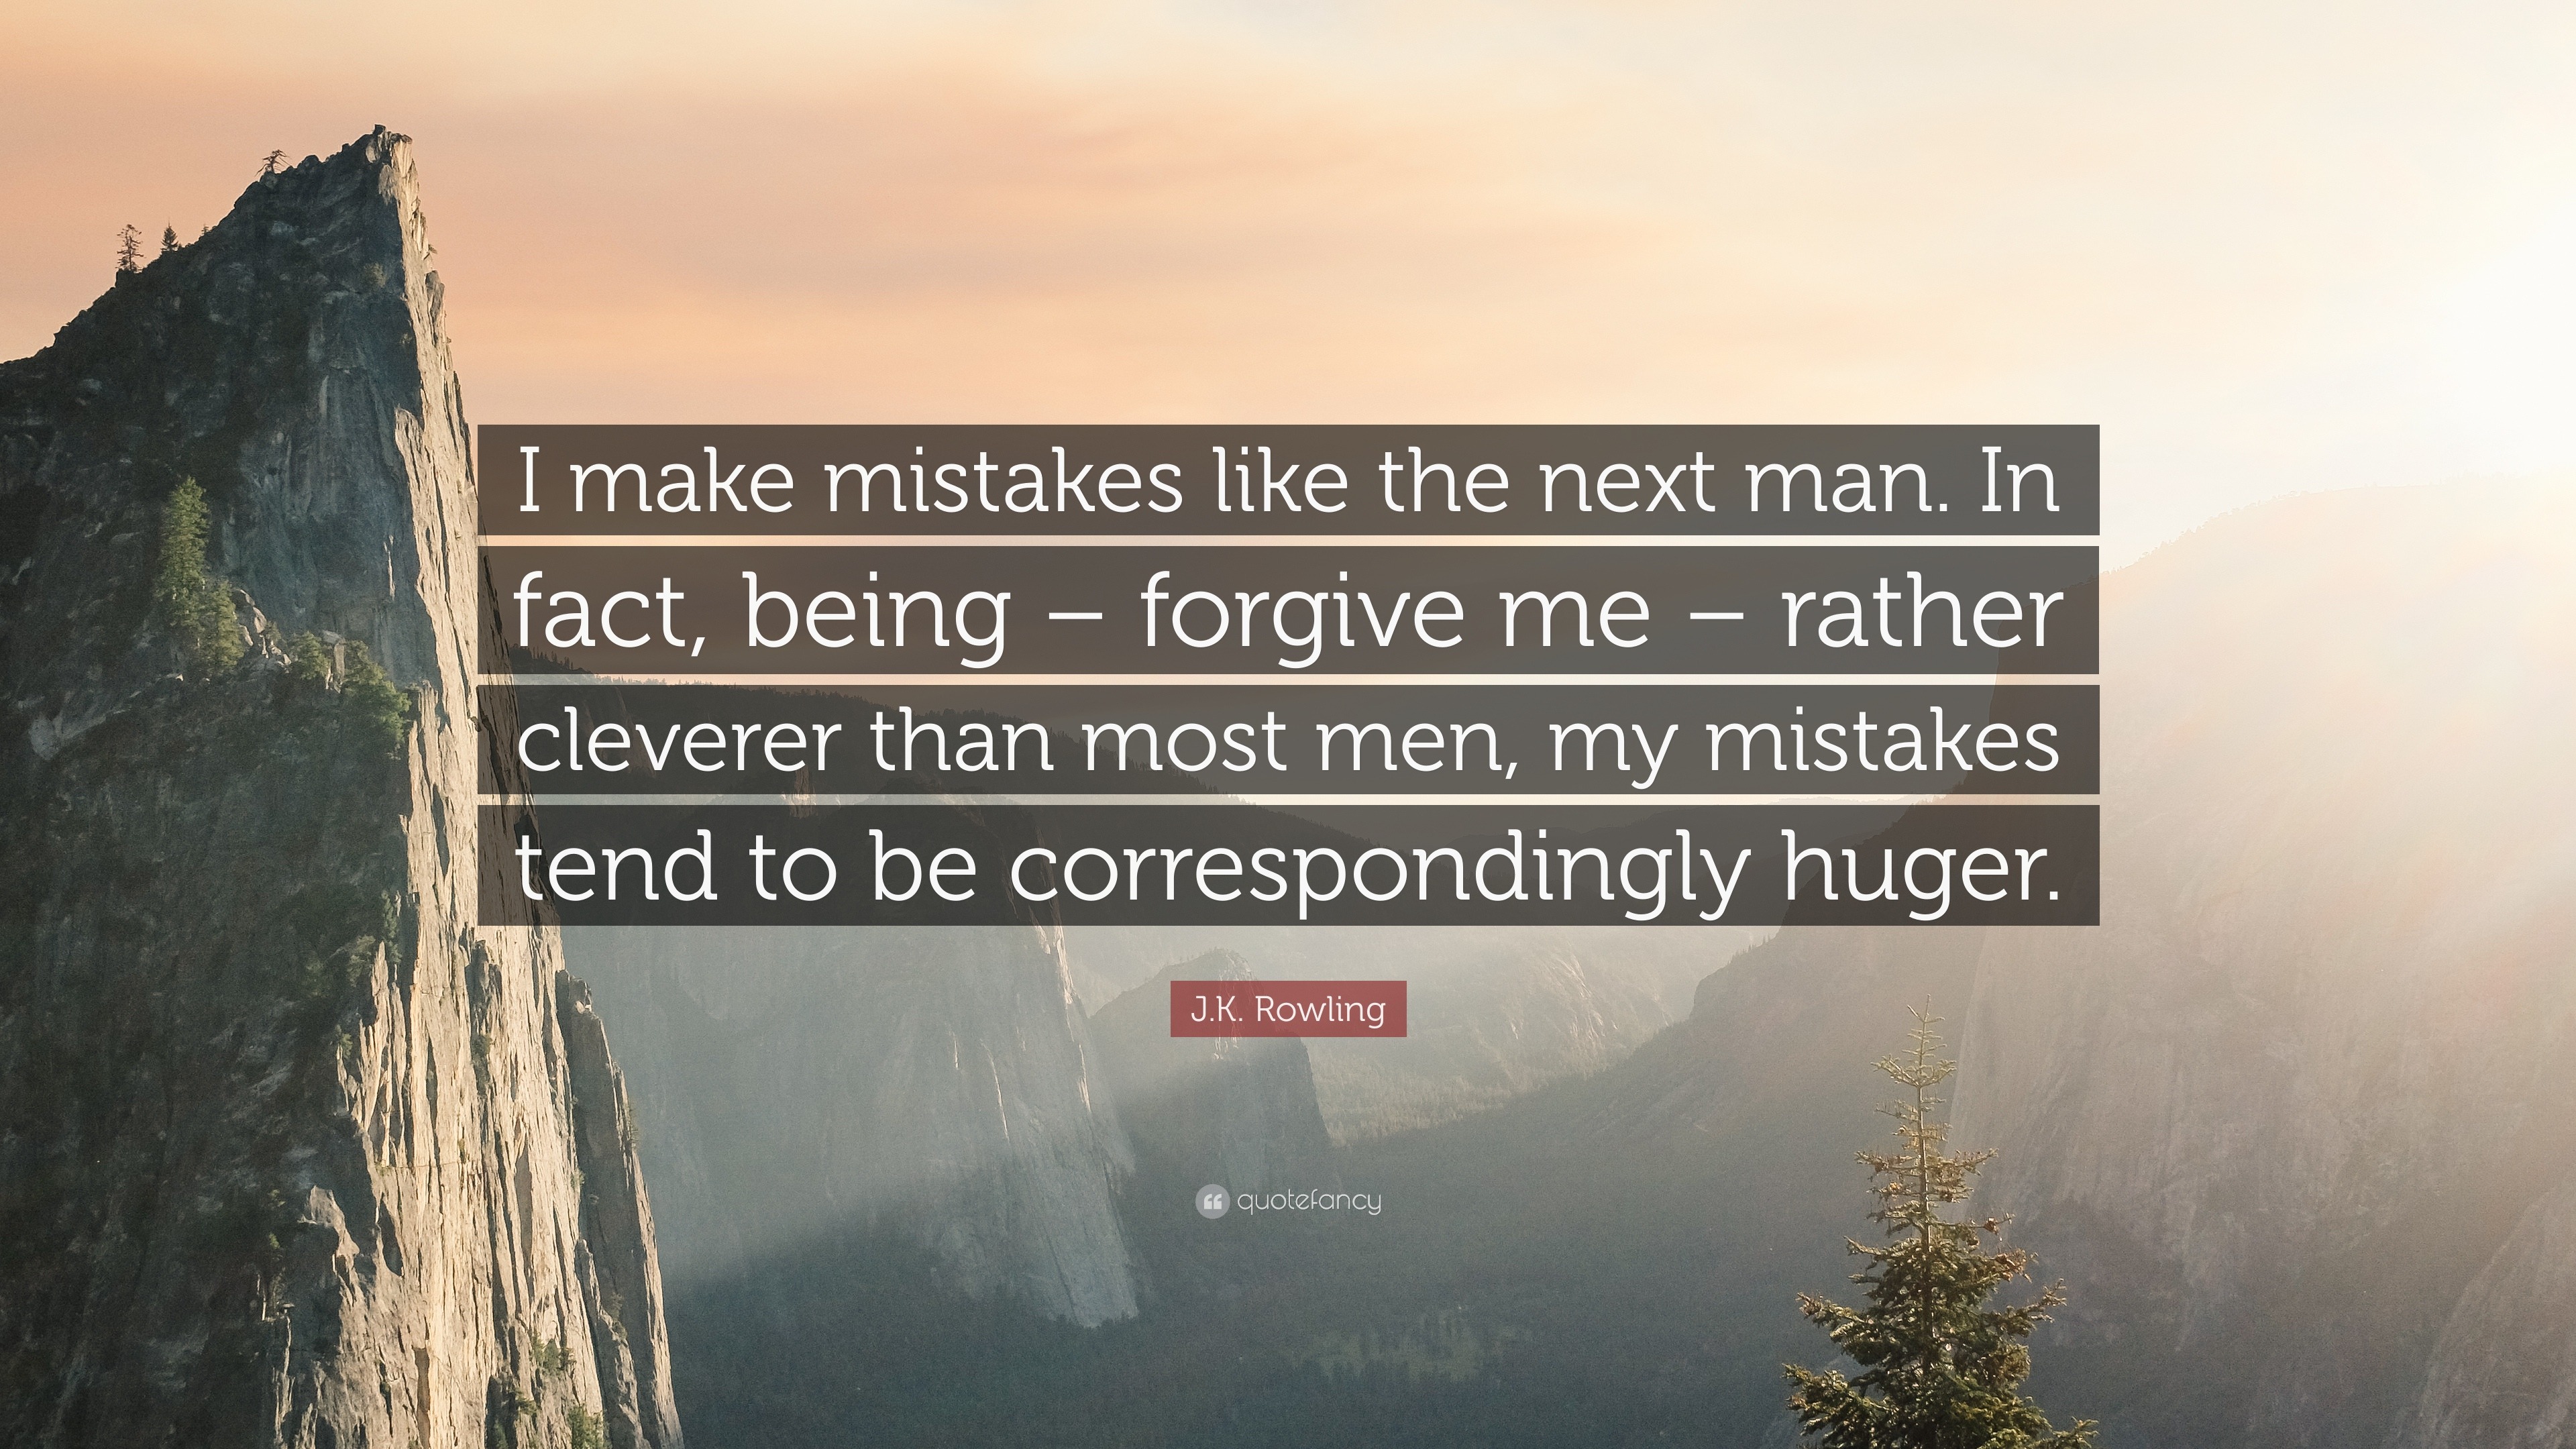 J.K. Rowling Quote: “I make mistakes like the next man. In fact, being –  forgive me – rather cleverer than most men, my mistakes tend to be c”